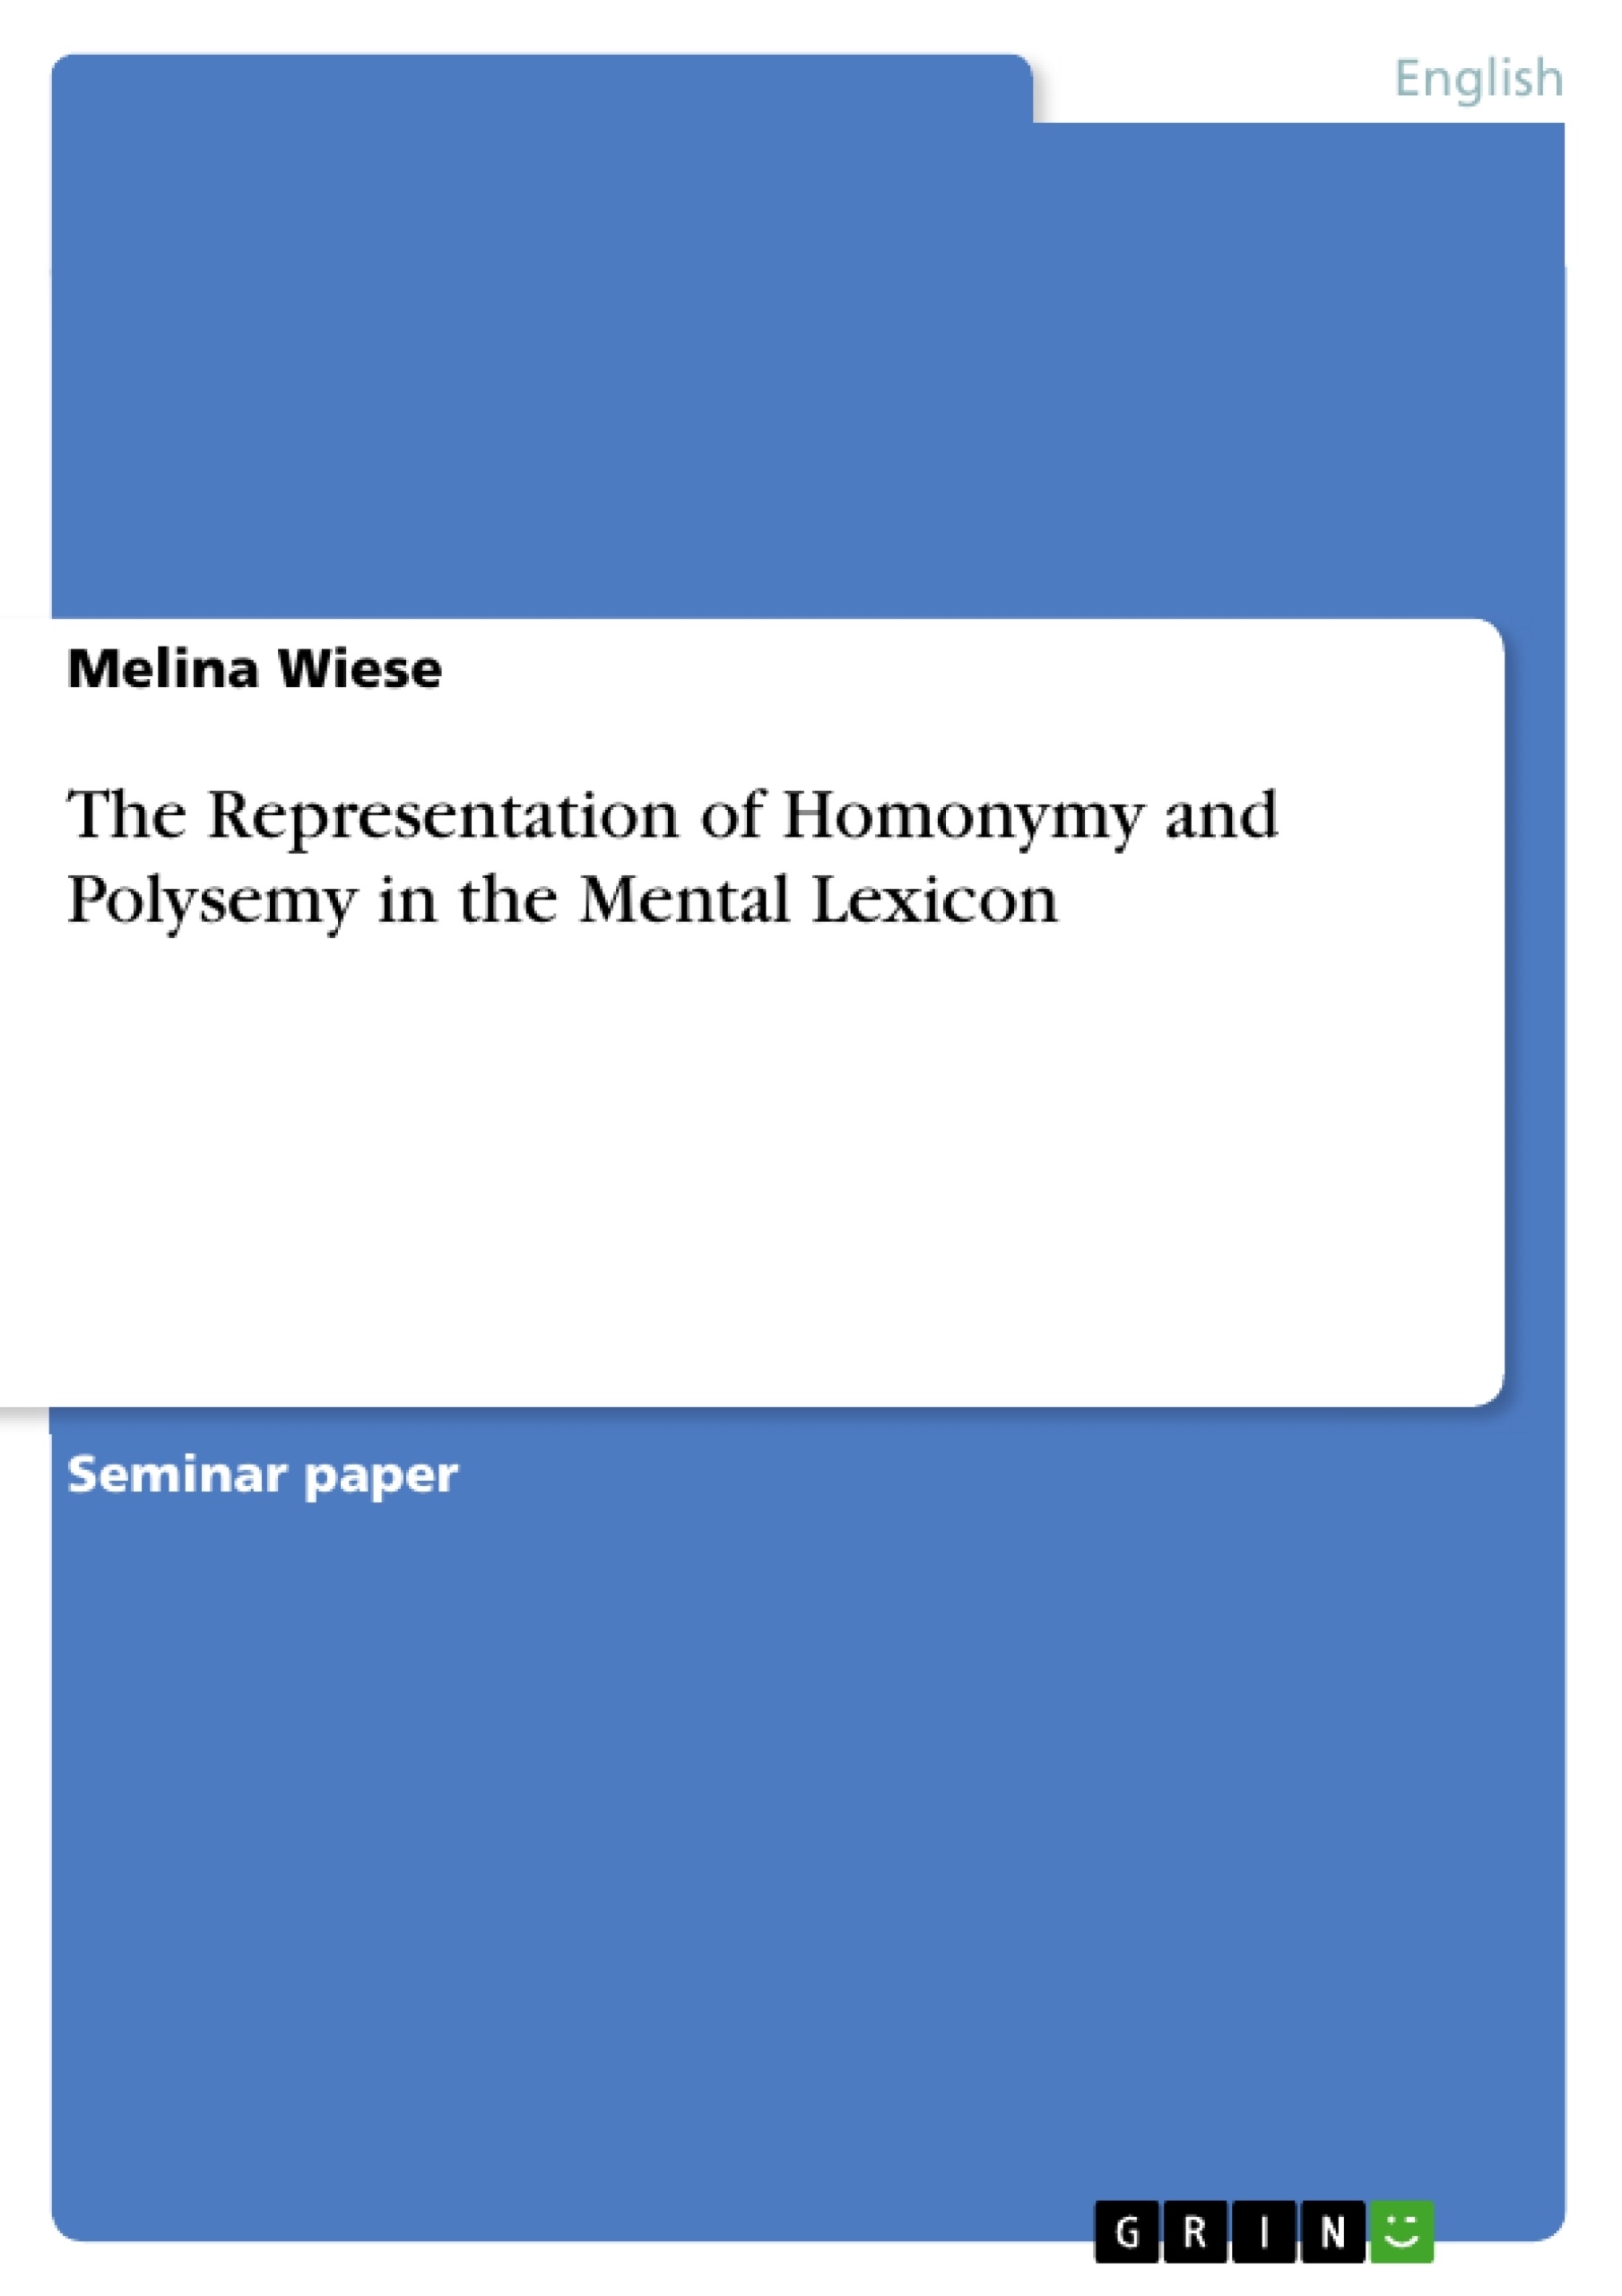 Titel: The Representation of Homonymy and Polysemy in the Mental Lexicon